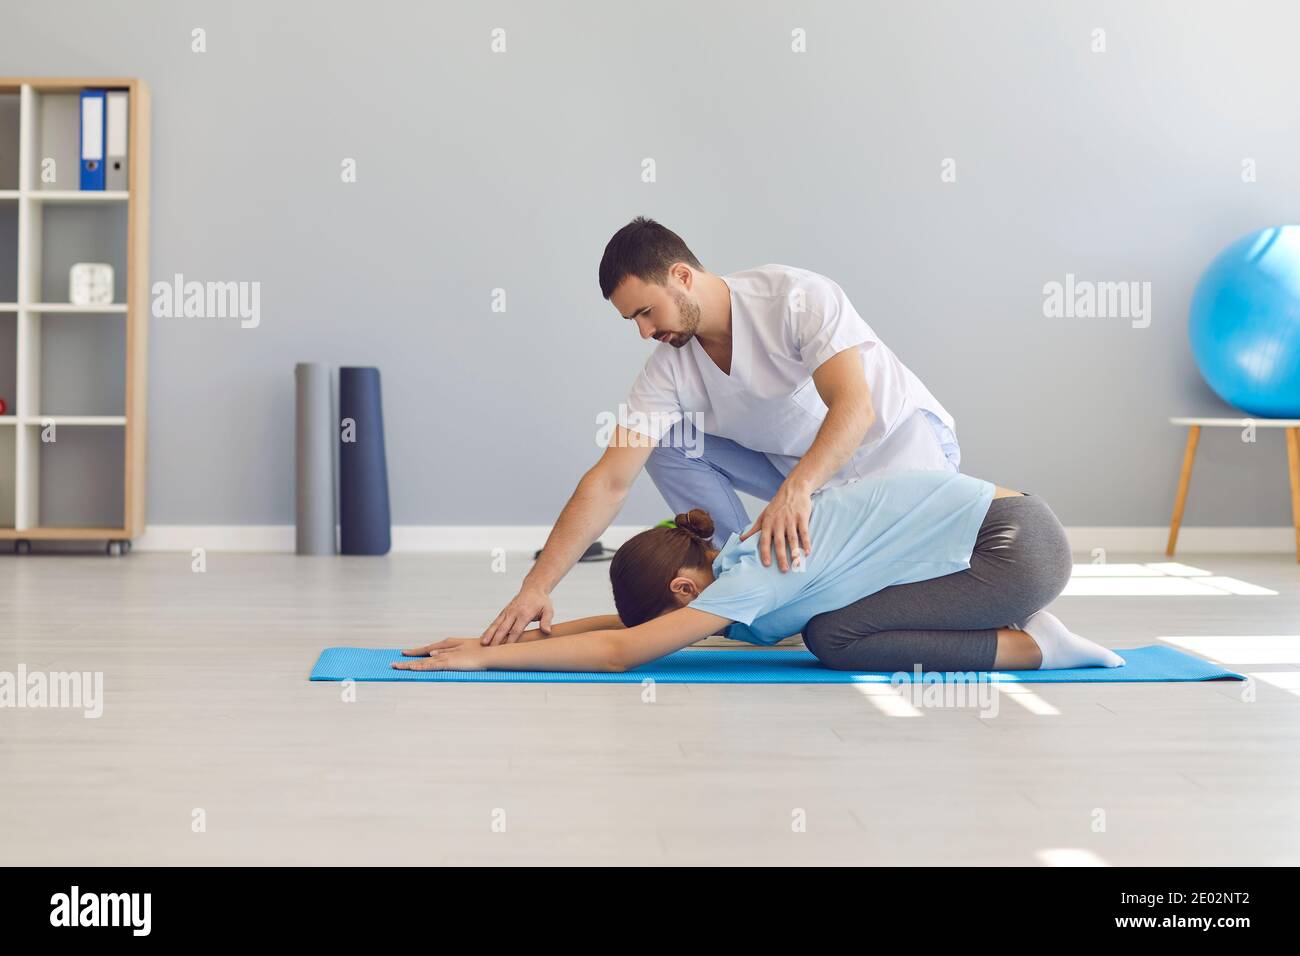 Side view the doctor helps the woman to do stretching and yoga exercises after the injury. Stock Photo